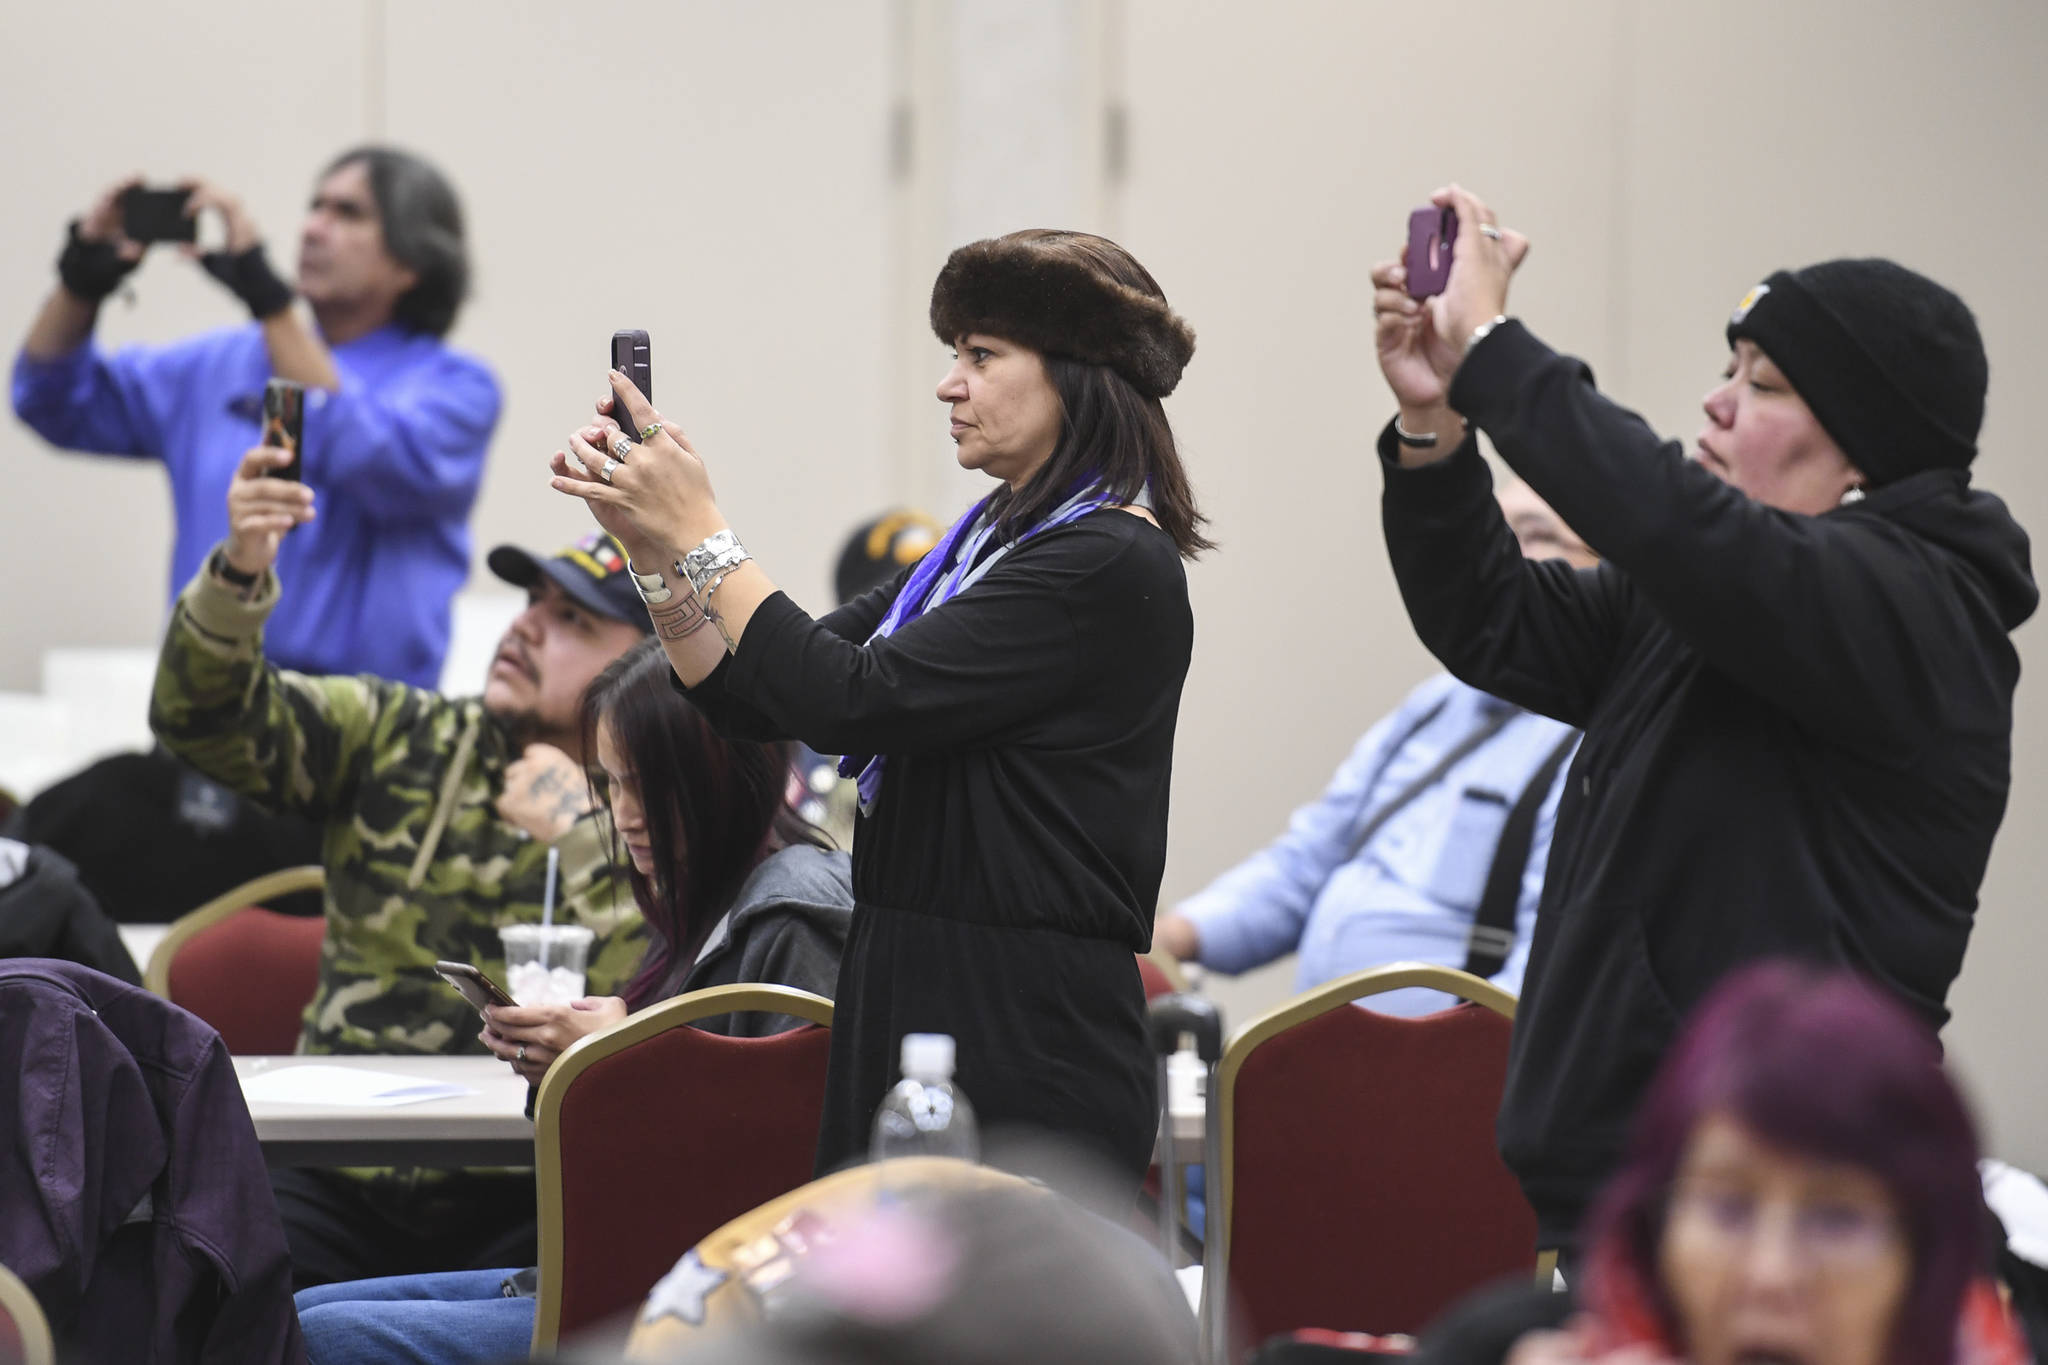 Juneau residents watch the Yaaw Tei Yi Dance Group perform during the Southeast Alaska Native Veteran’s Veterans Day luncheon at the Elizabeth Peratrovich Hall on Monday, Nov. 11, 2019. (Michael Penn | Juneau Empire)